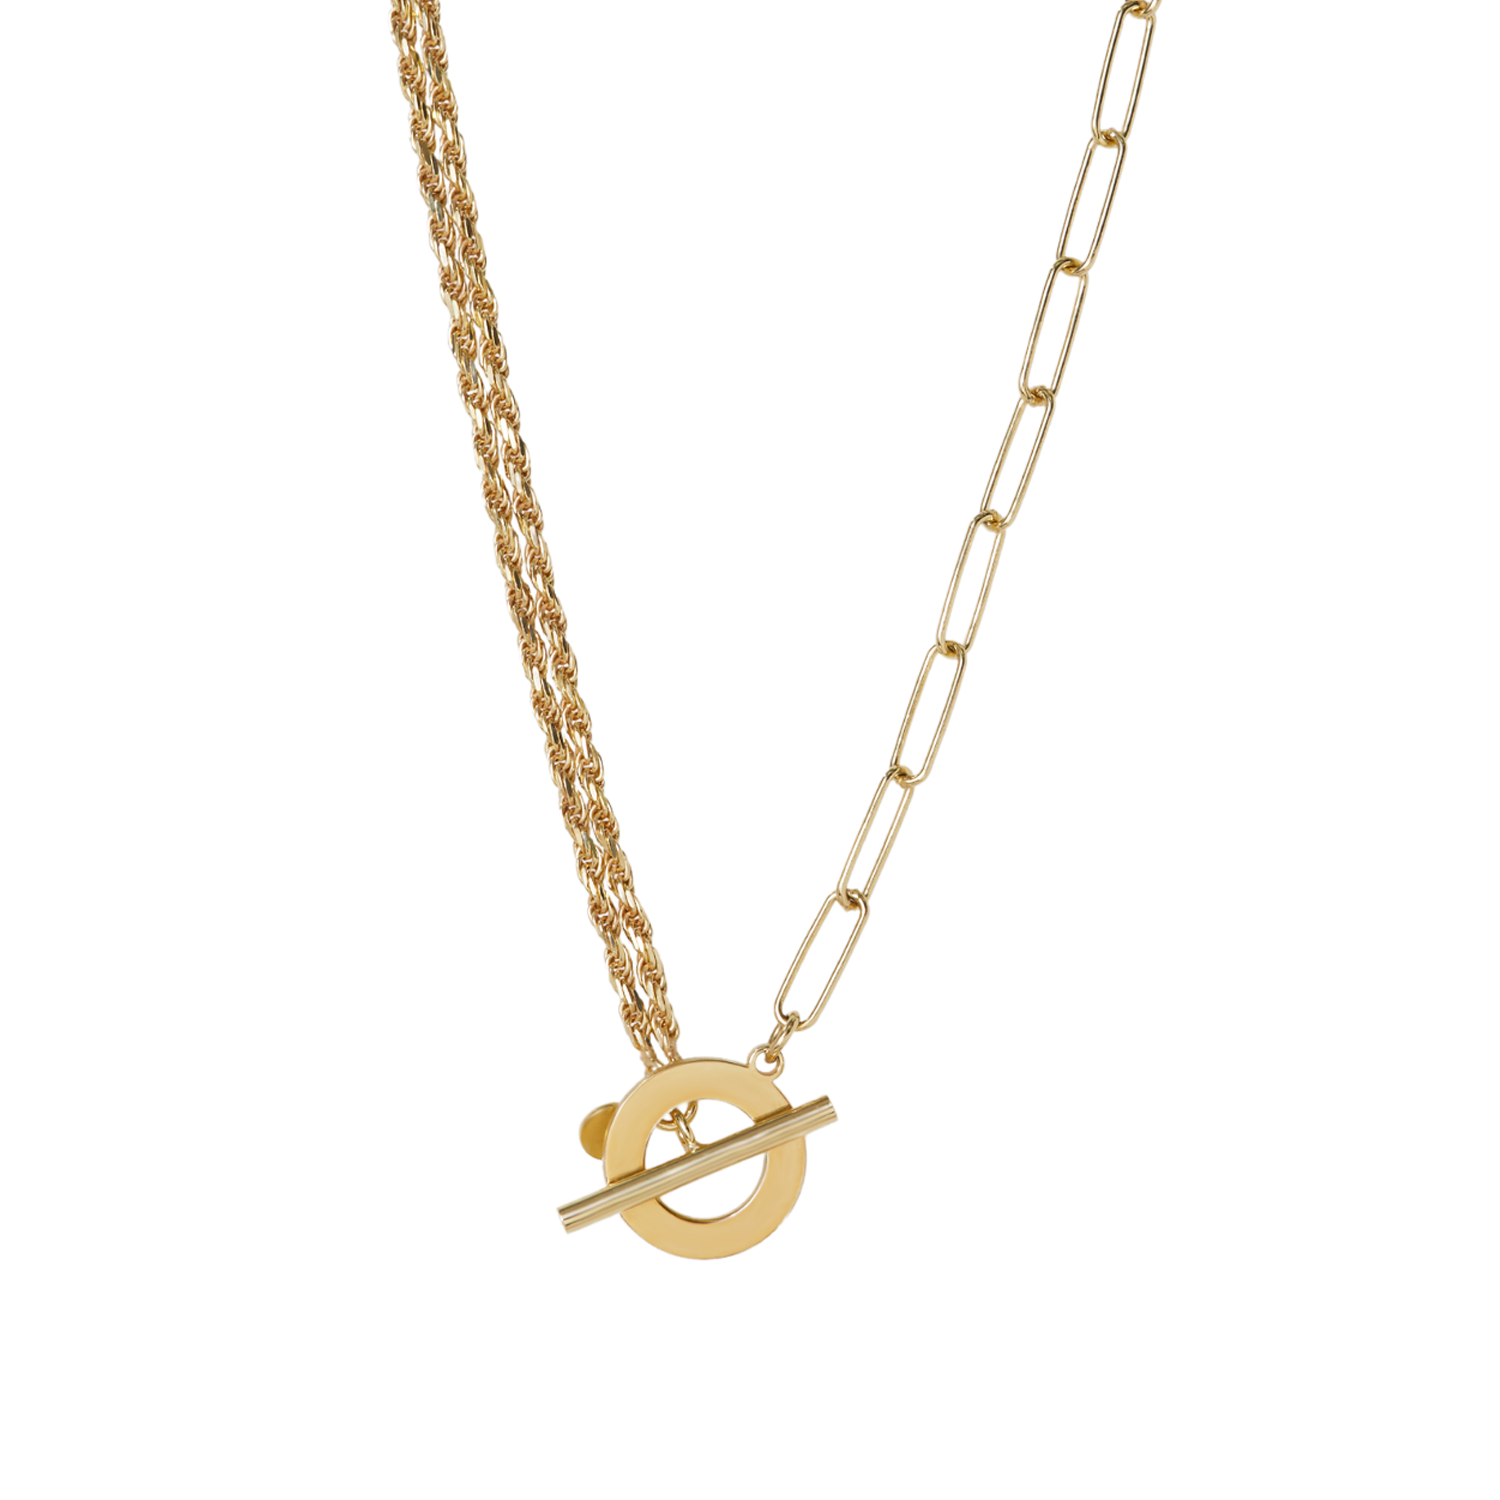 THE DOUBLE ROPE CLIP CHAIN TOGGLE NECKLACE